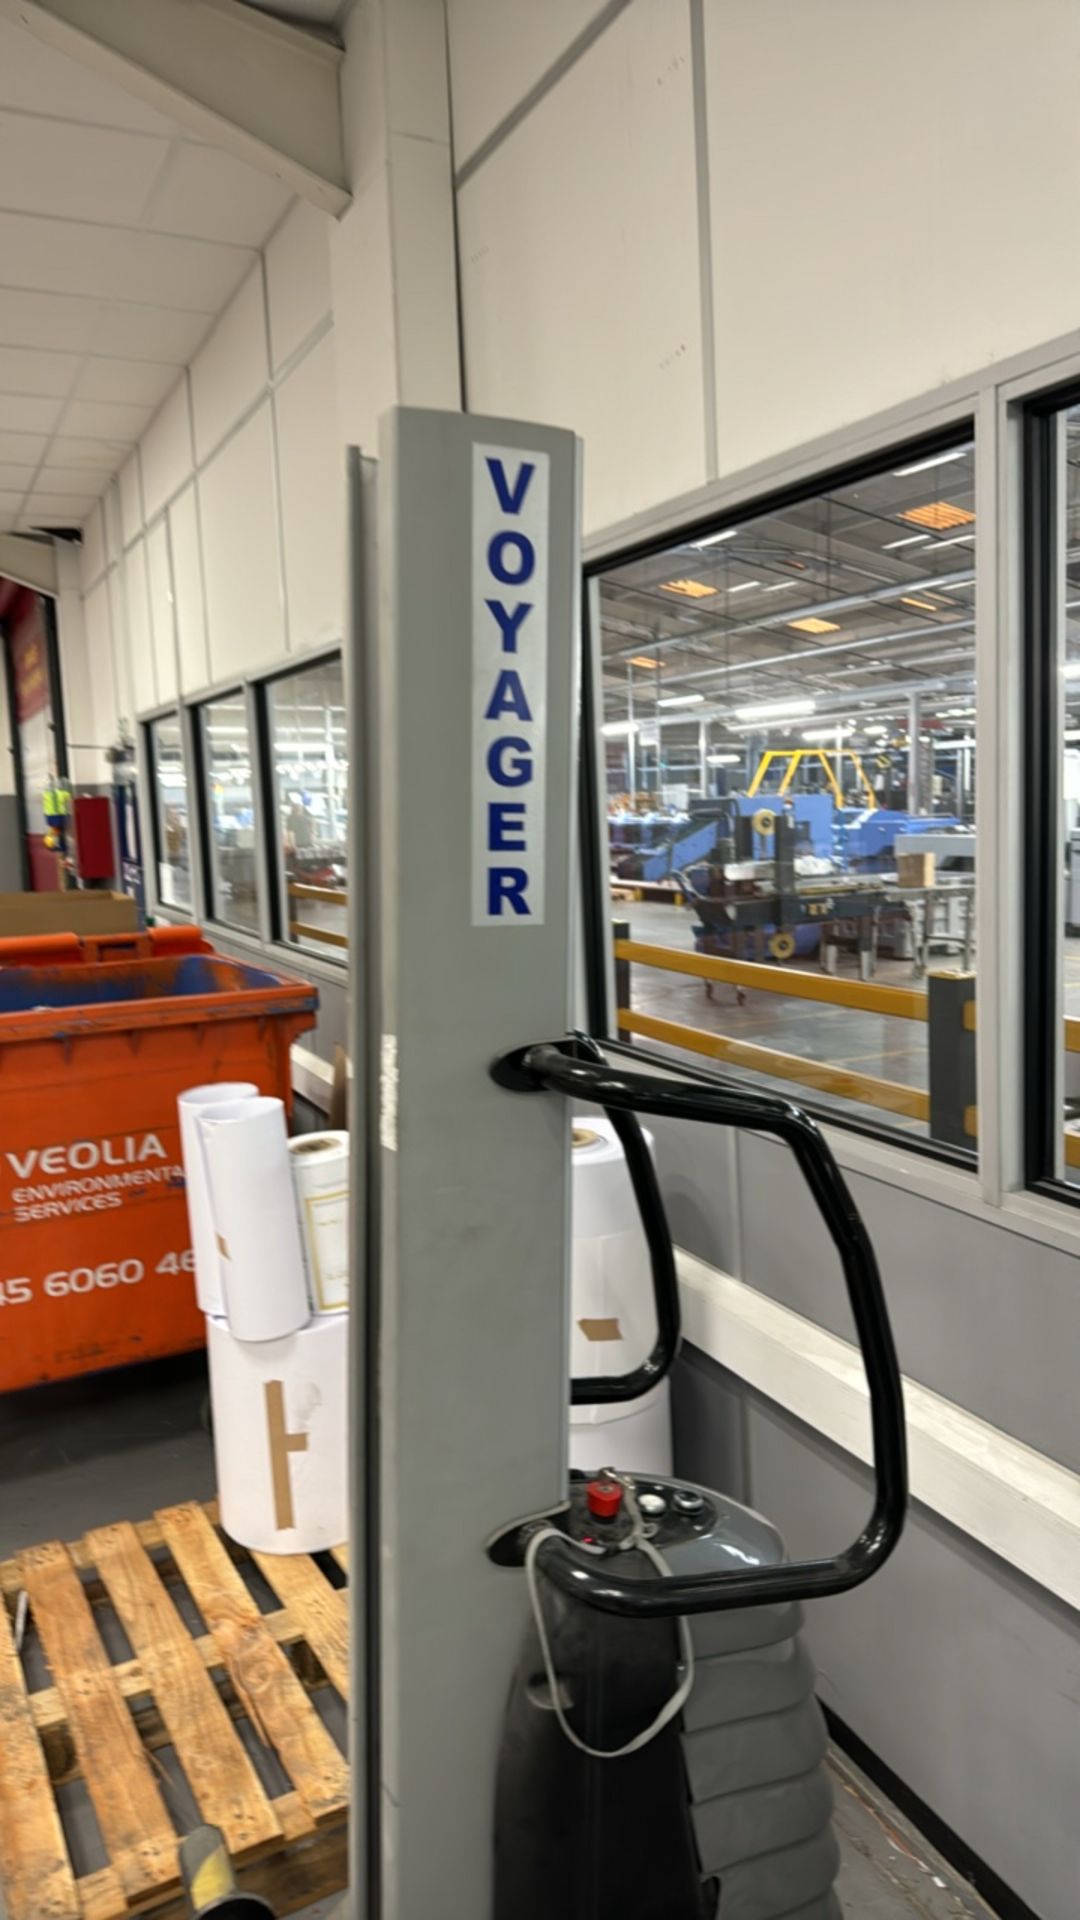 ref 40 - Voyager Electric Handling Lift - Image 5 of 9